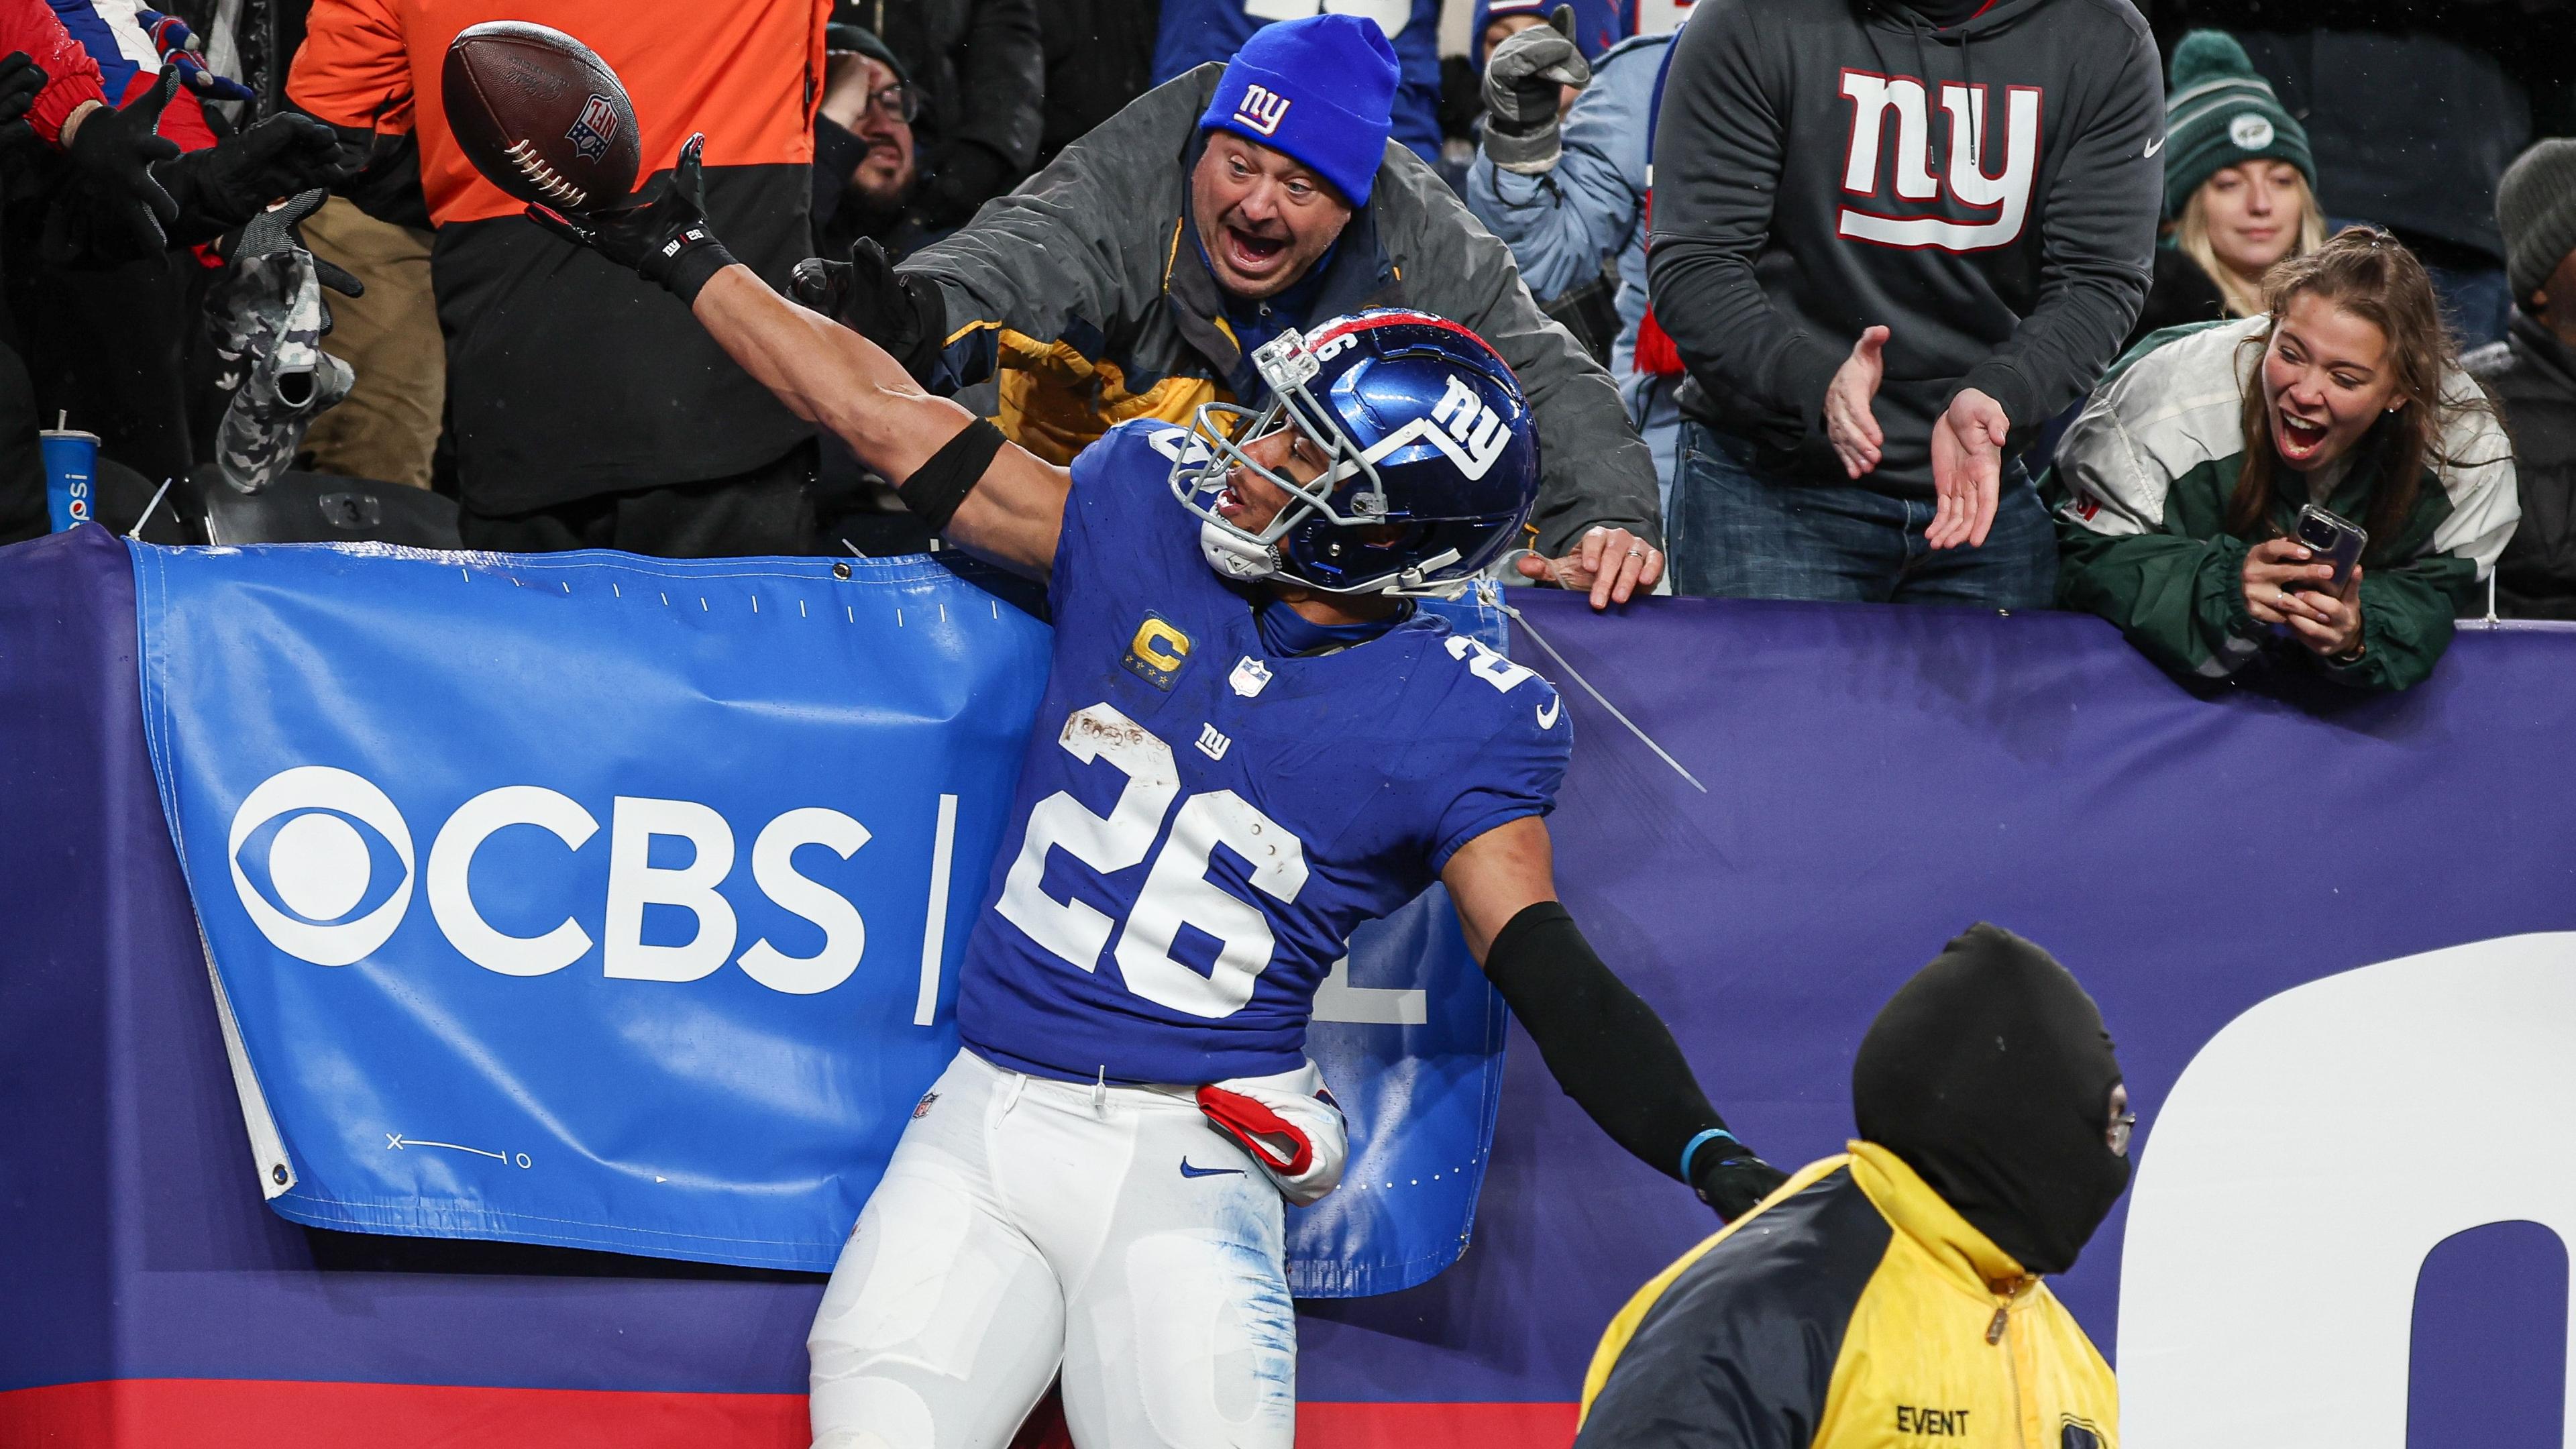 Jan 7, 2024; East Rutherford, New Jersey, USA; New York Giants running back Saquon Barkley (26) gives the game ball to a young fan after scoring his second touchdown of the game during the first half against the Philadelphia Eagles at MetLife Stadium. Mandatory Credit: Vincent Carchietta-USA TODAY Sports / © Vincent Carchietta-USA TODAY Sports